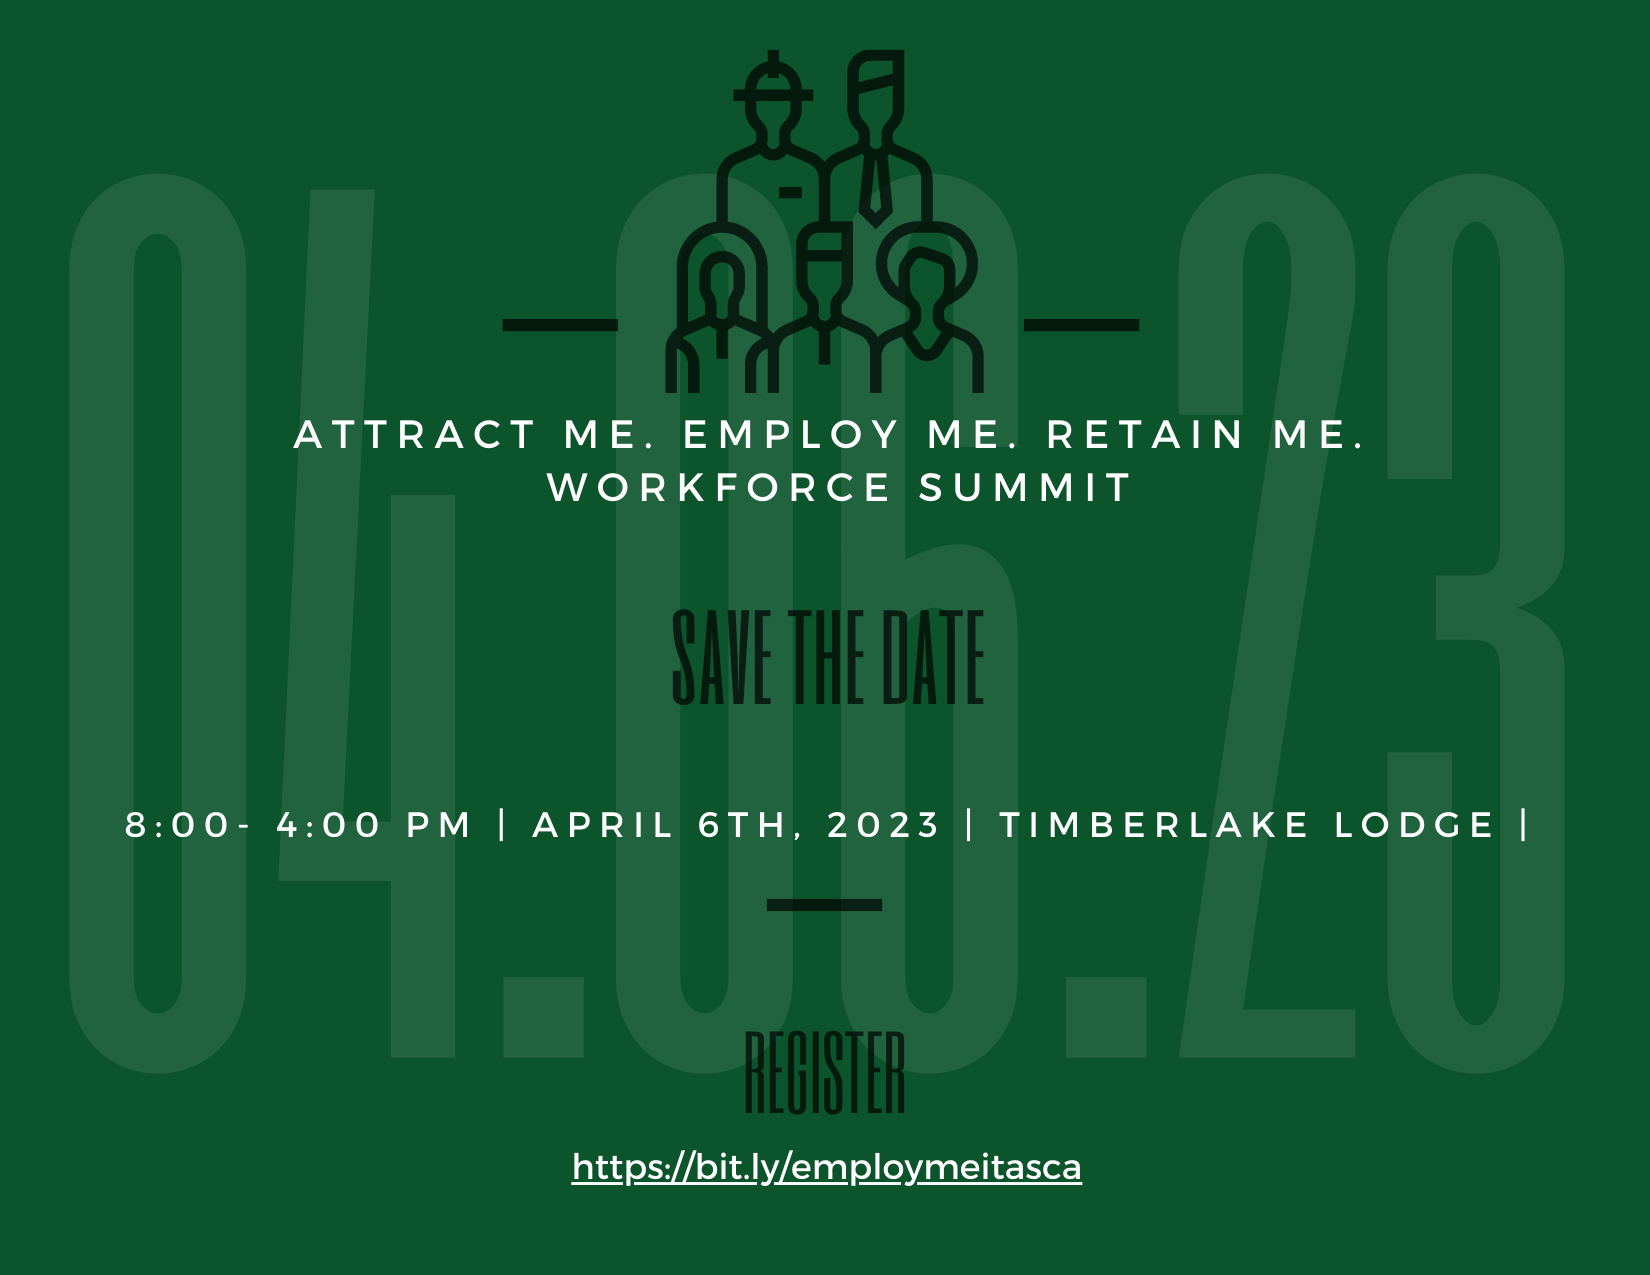 Event Promo Photo For Attract Me. Employ Me. Retain Me. Workforce Summit